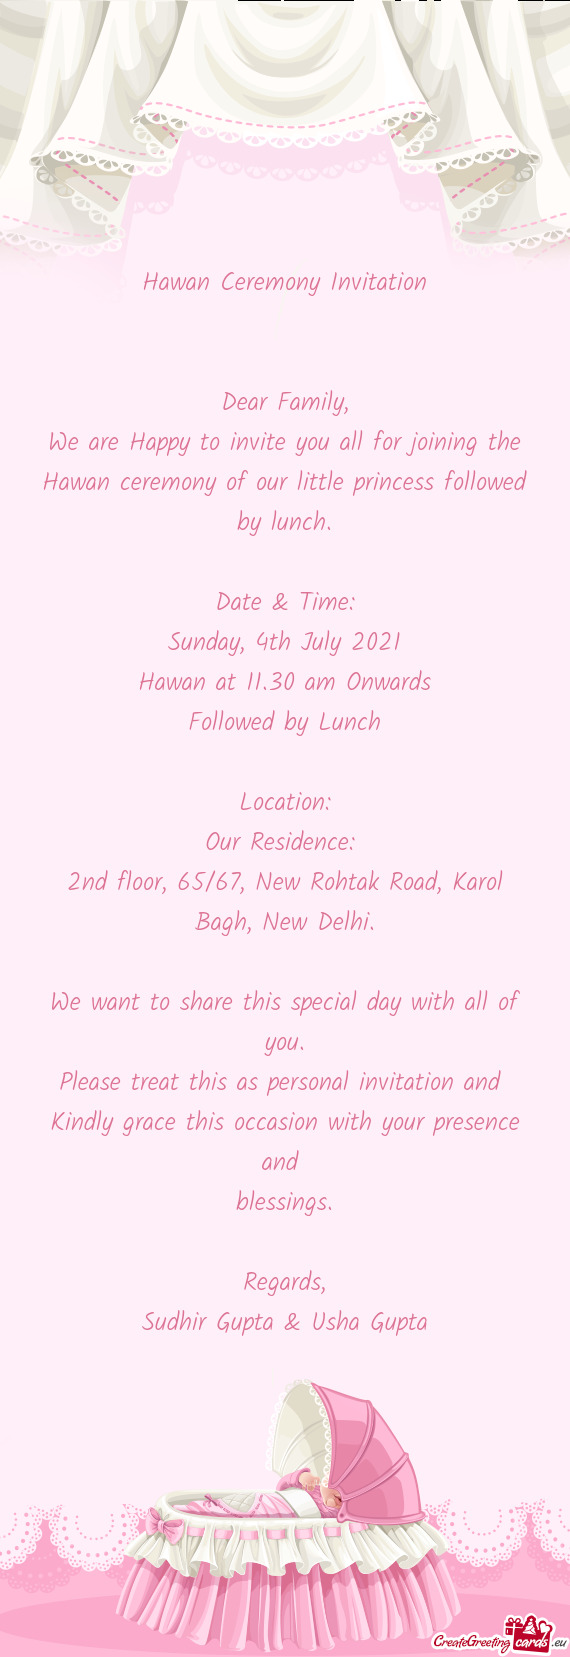 We are Happy to invite you all for joining the Hawan ceremony of our little princess followed by lun